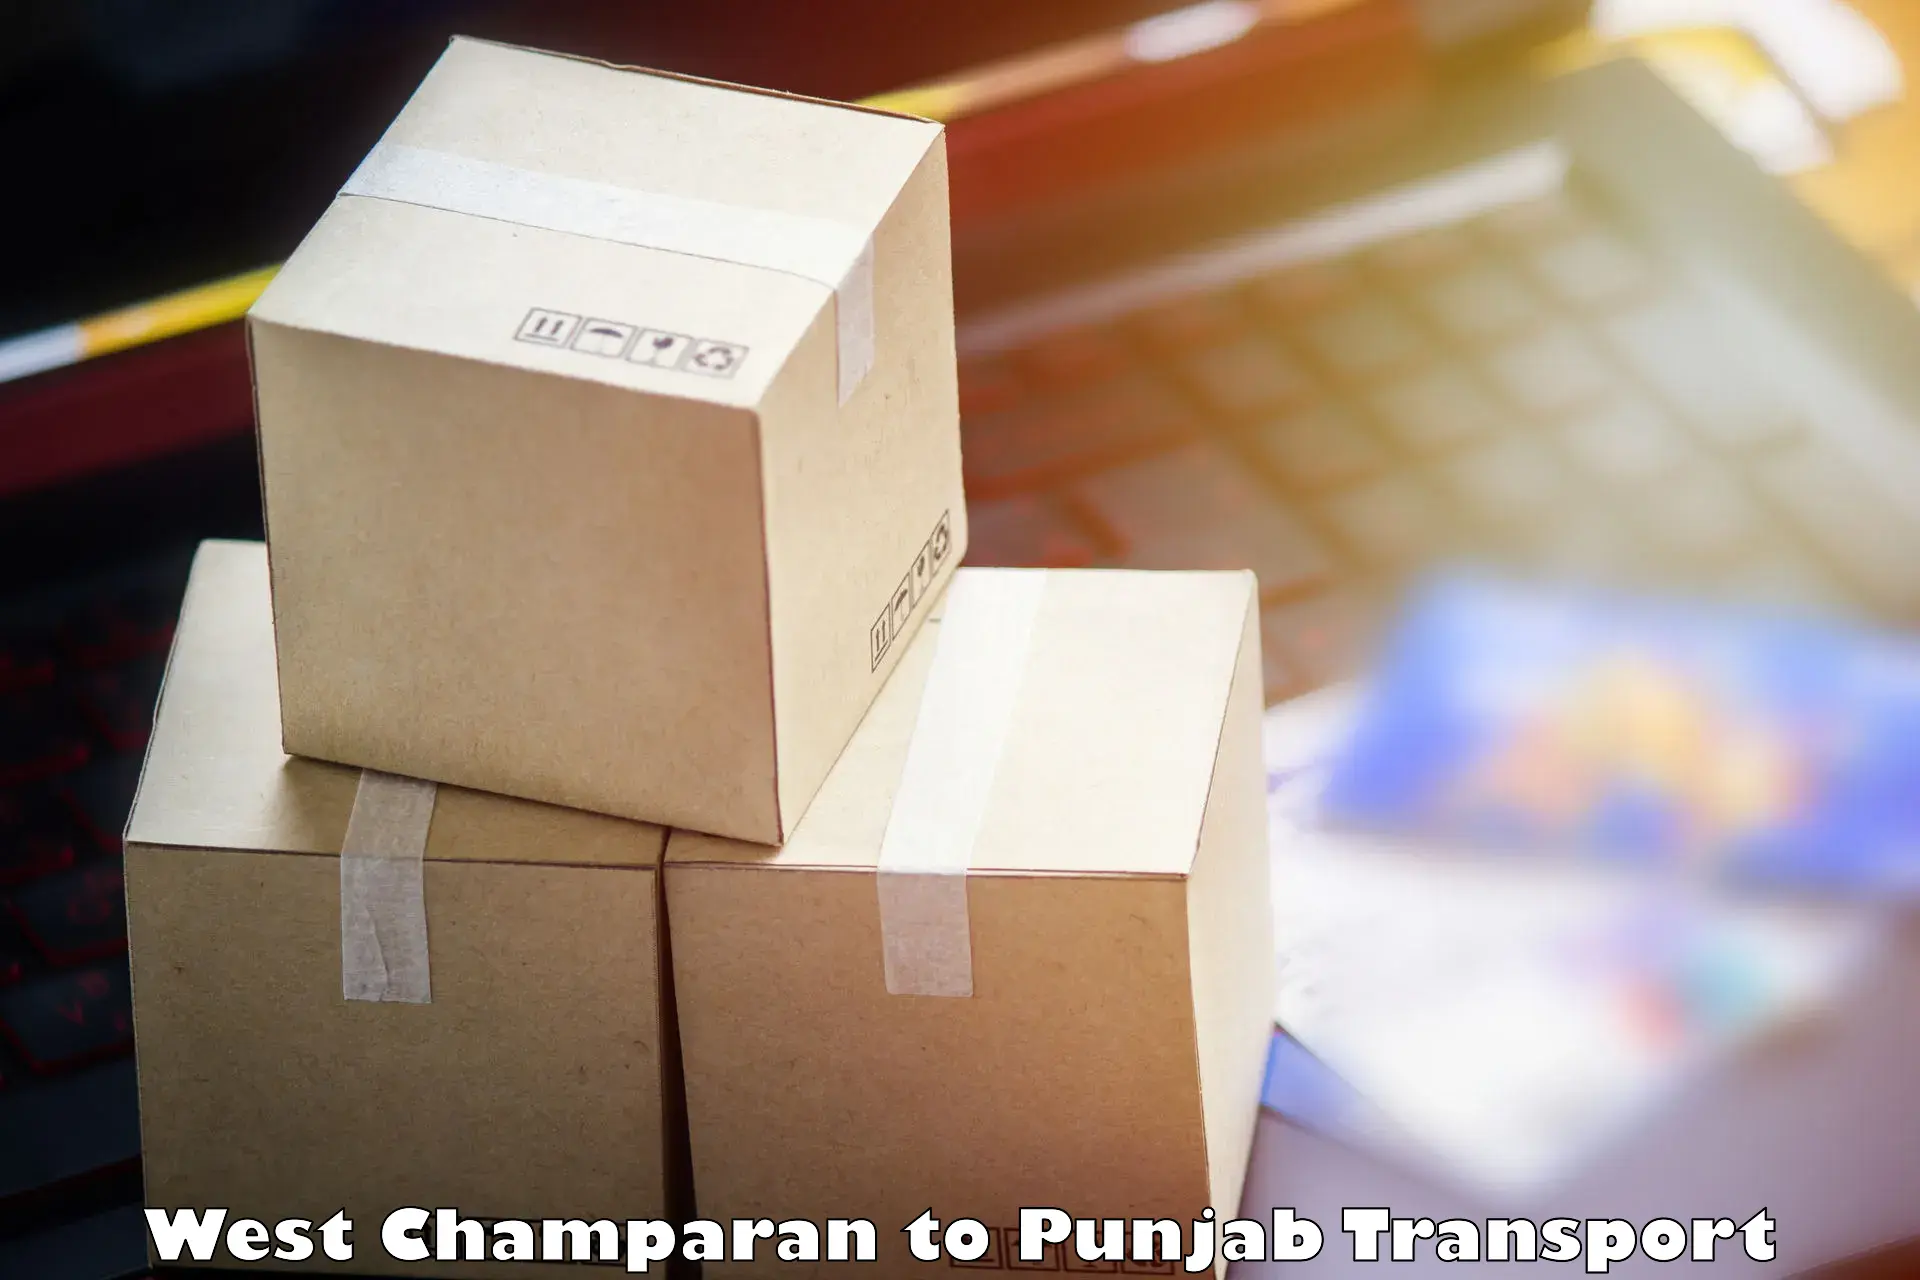 Two wheeler parcel service West Champaran to Amritsar